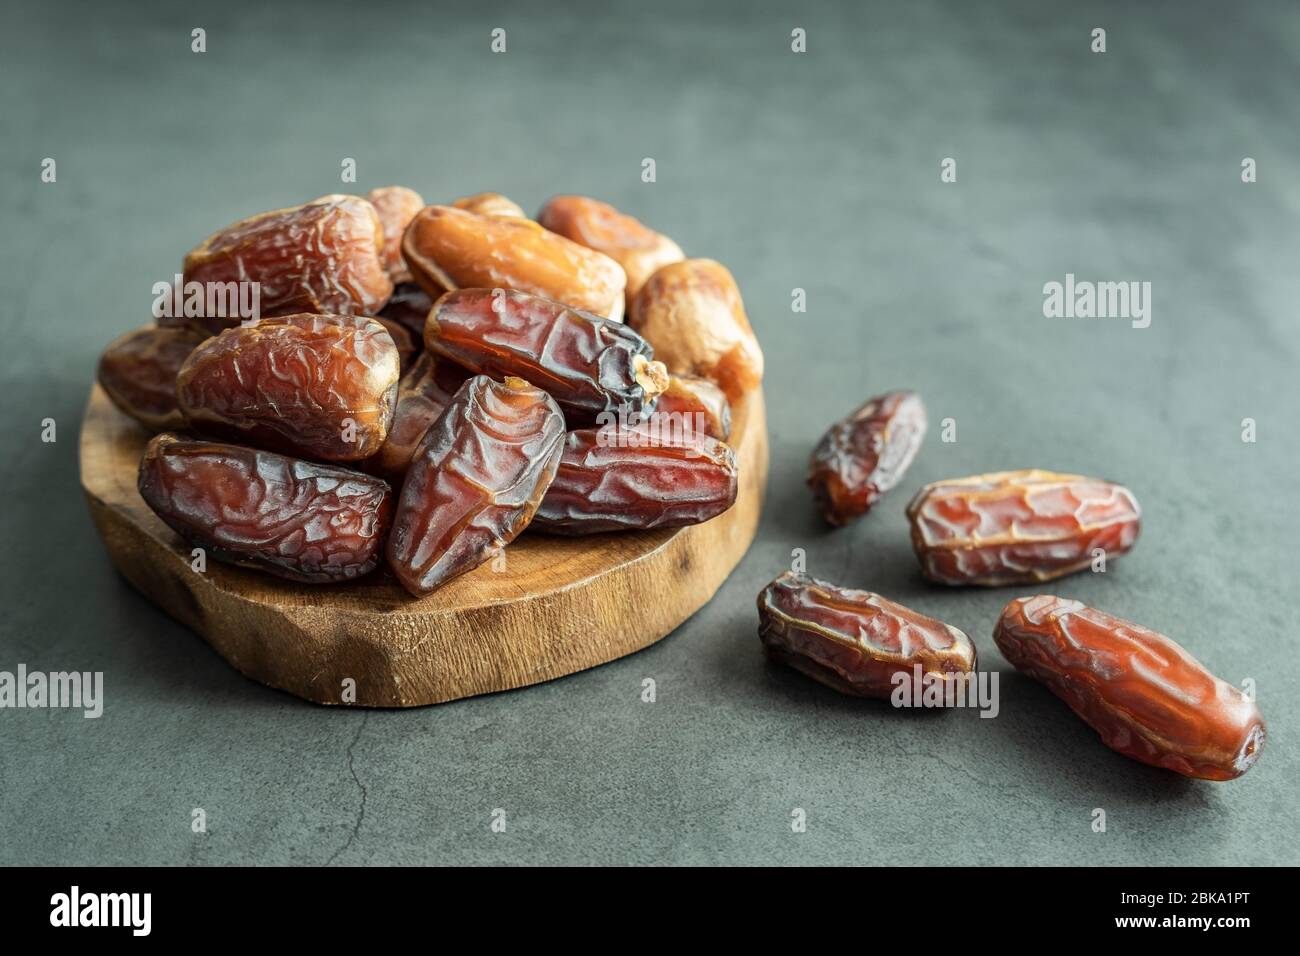 Raw date fruit ready to eat in wooden platter on concrete background. Traditional, delicious and healthy ramadan food. Stock Photo